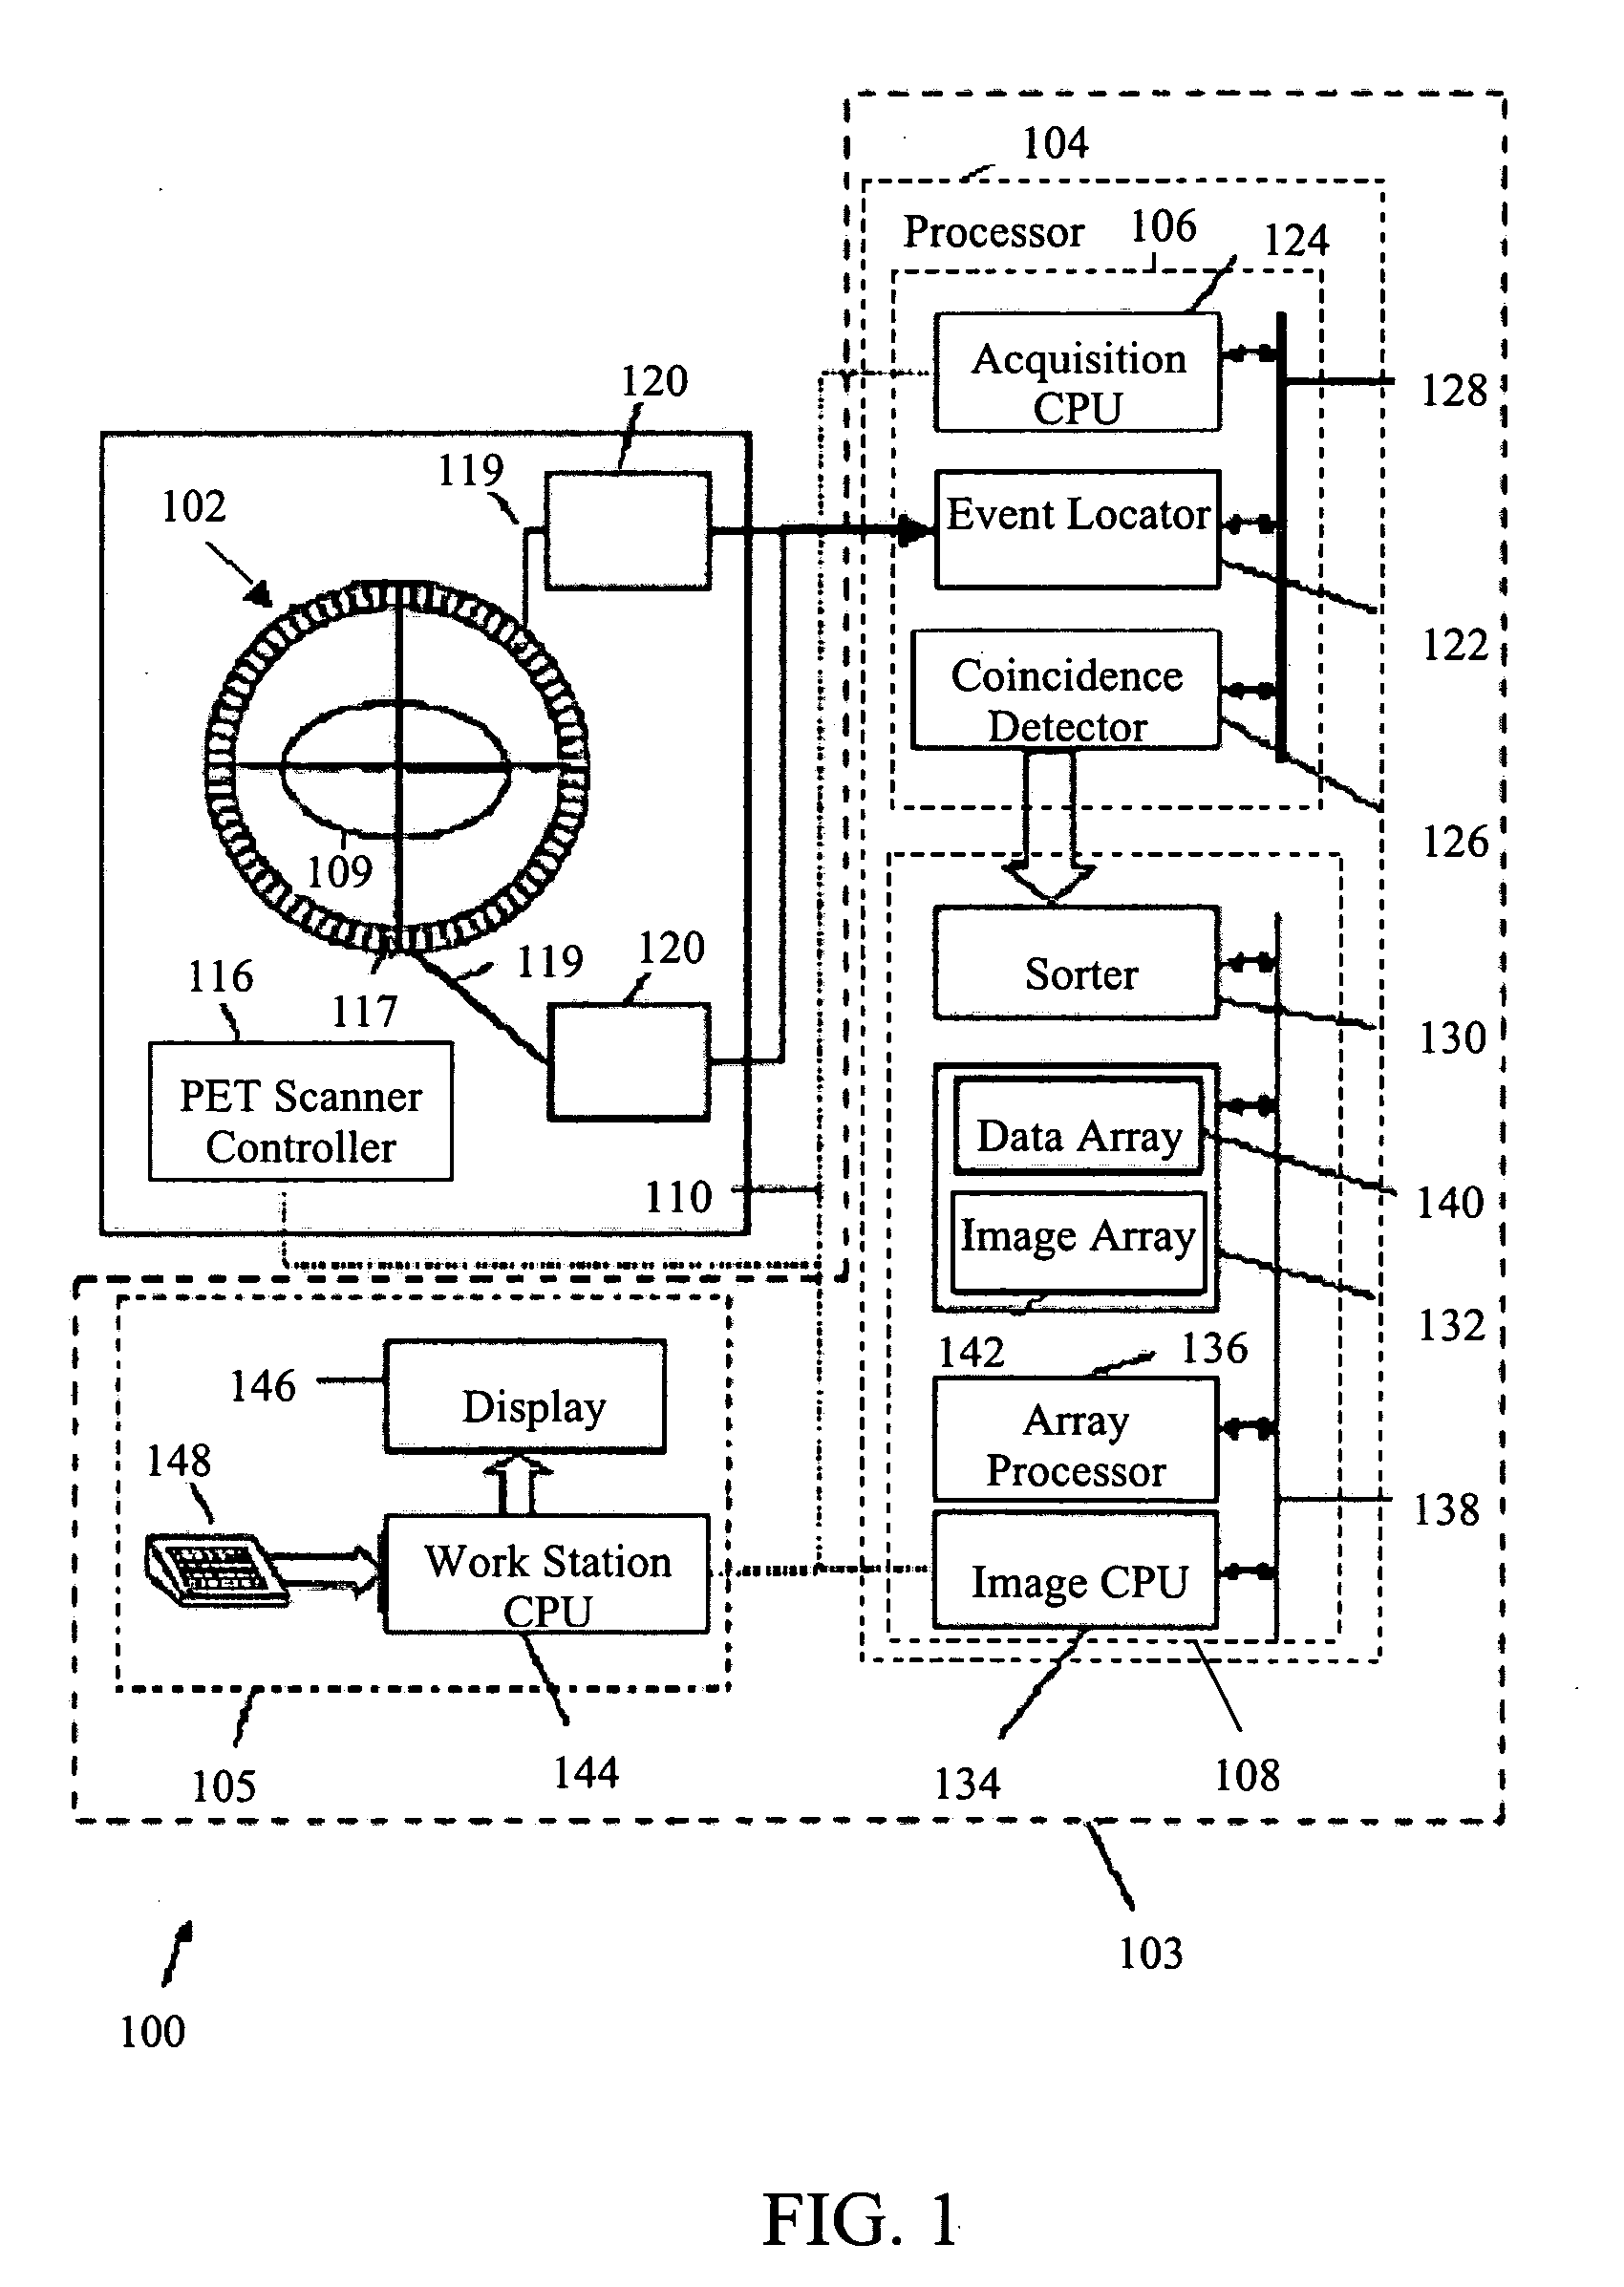 Method and system for scattered coincidence estimation in a time-of-flight positron emission tomography system